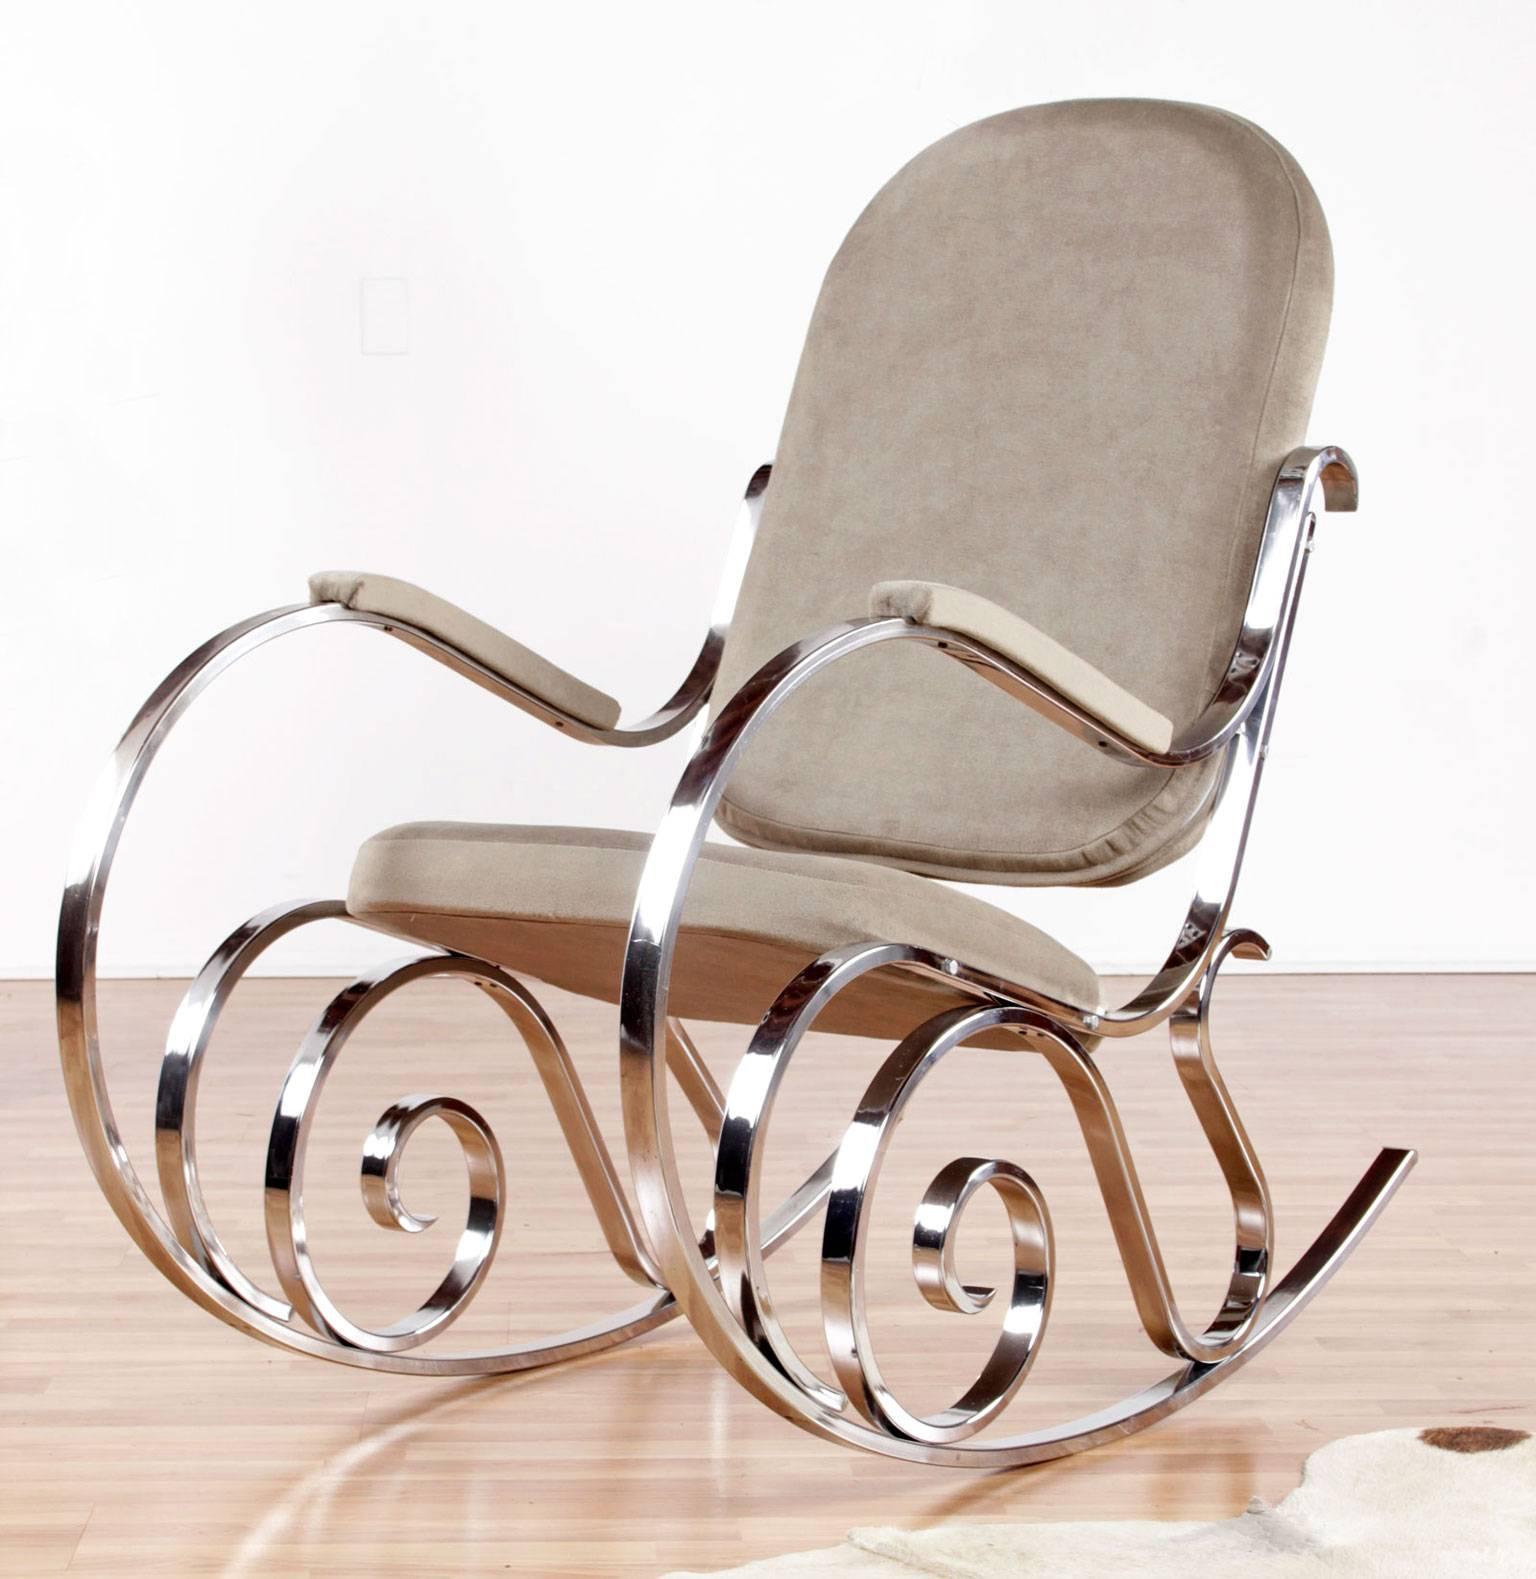 Stunning vintage, 1970s chrome rocking chair designed by Maison Jansen in the 1970s. This Mid-Century Modern style rocker is restored with new taupe colored velour upholstery. The elaborate scroll work of the chrome chair frame gleams as light works